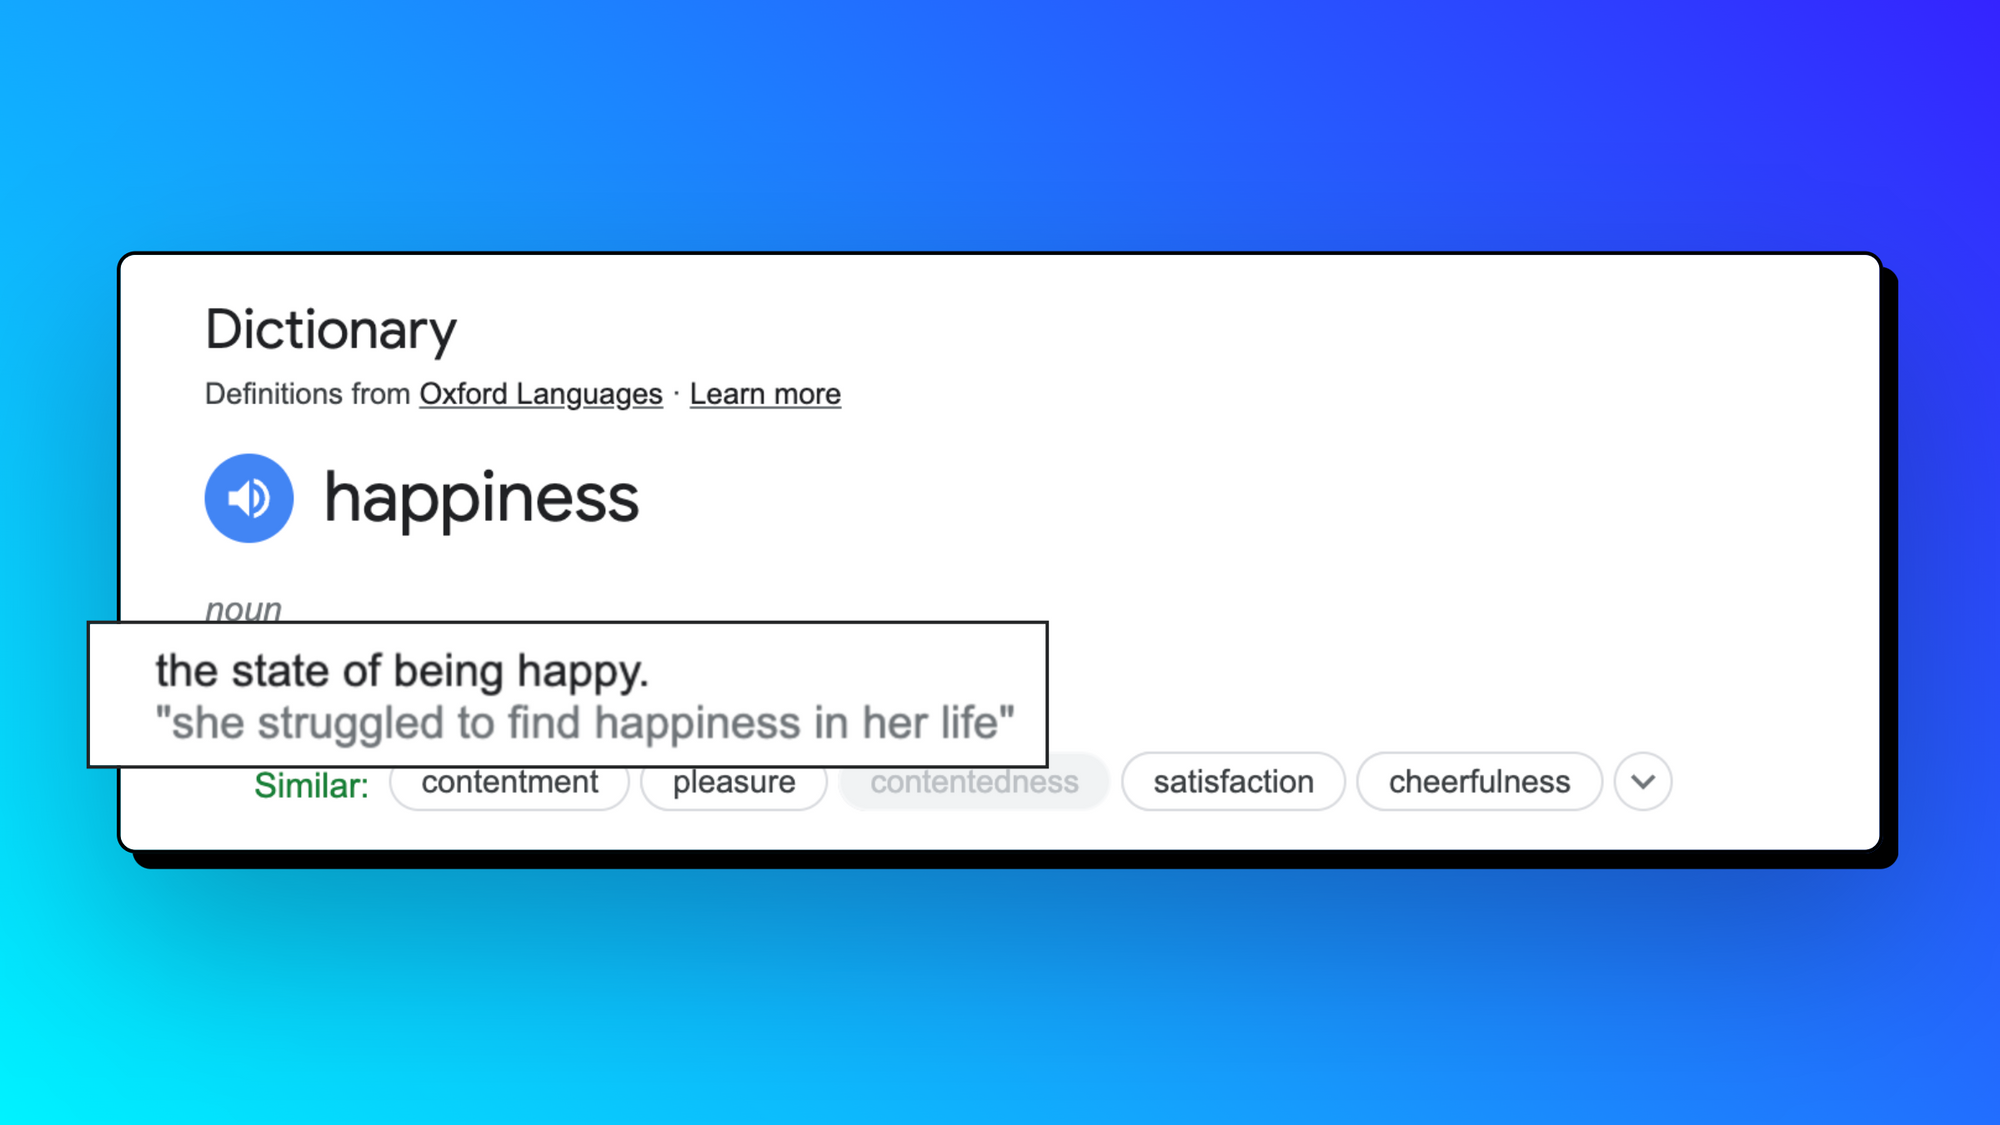 The definition of happiness is "the state of being happy". Super helpful.